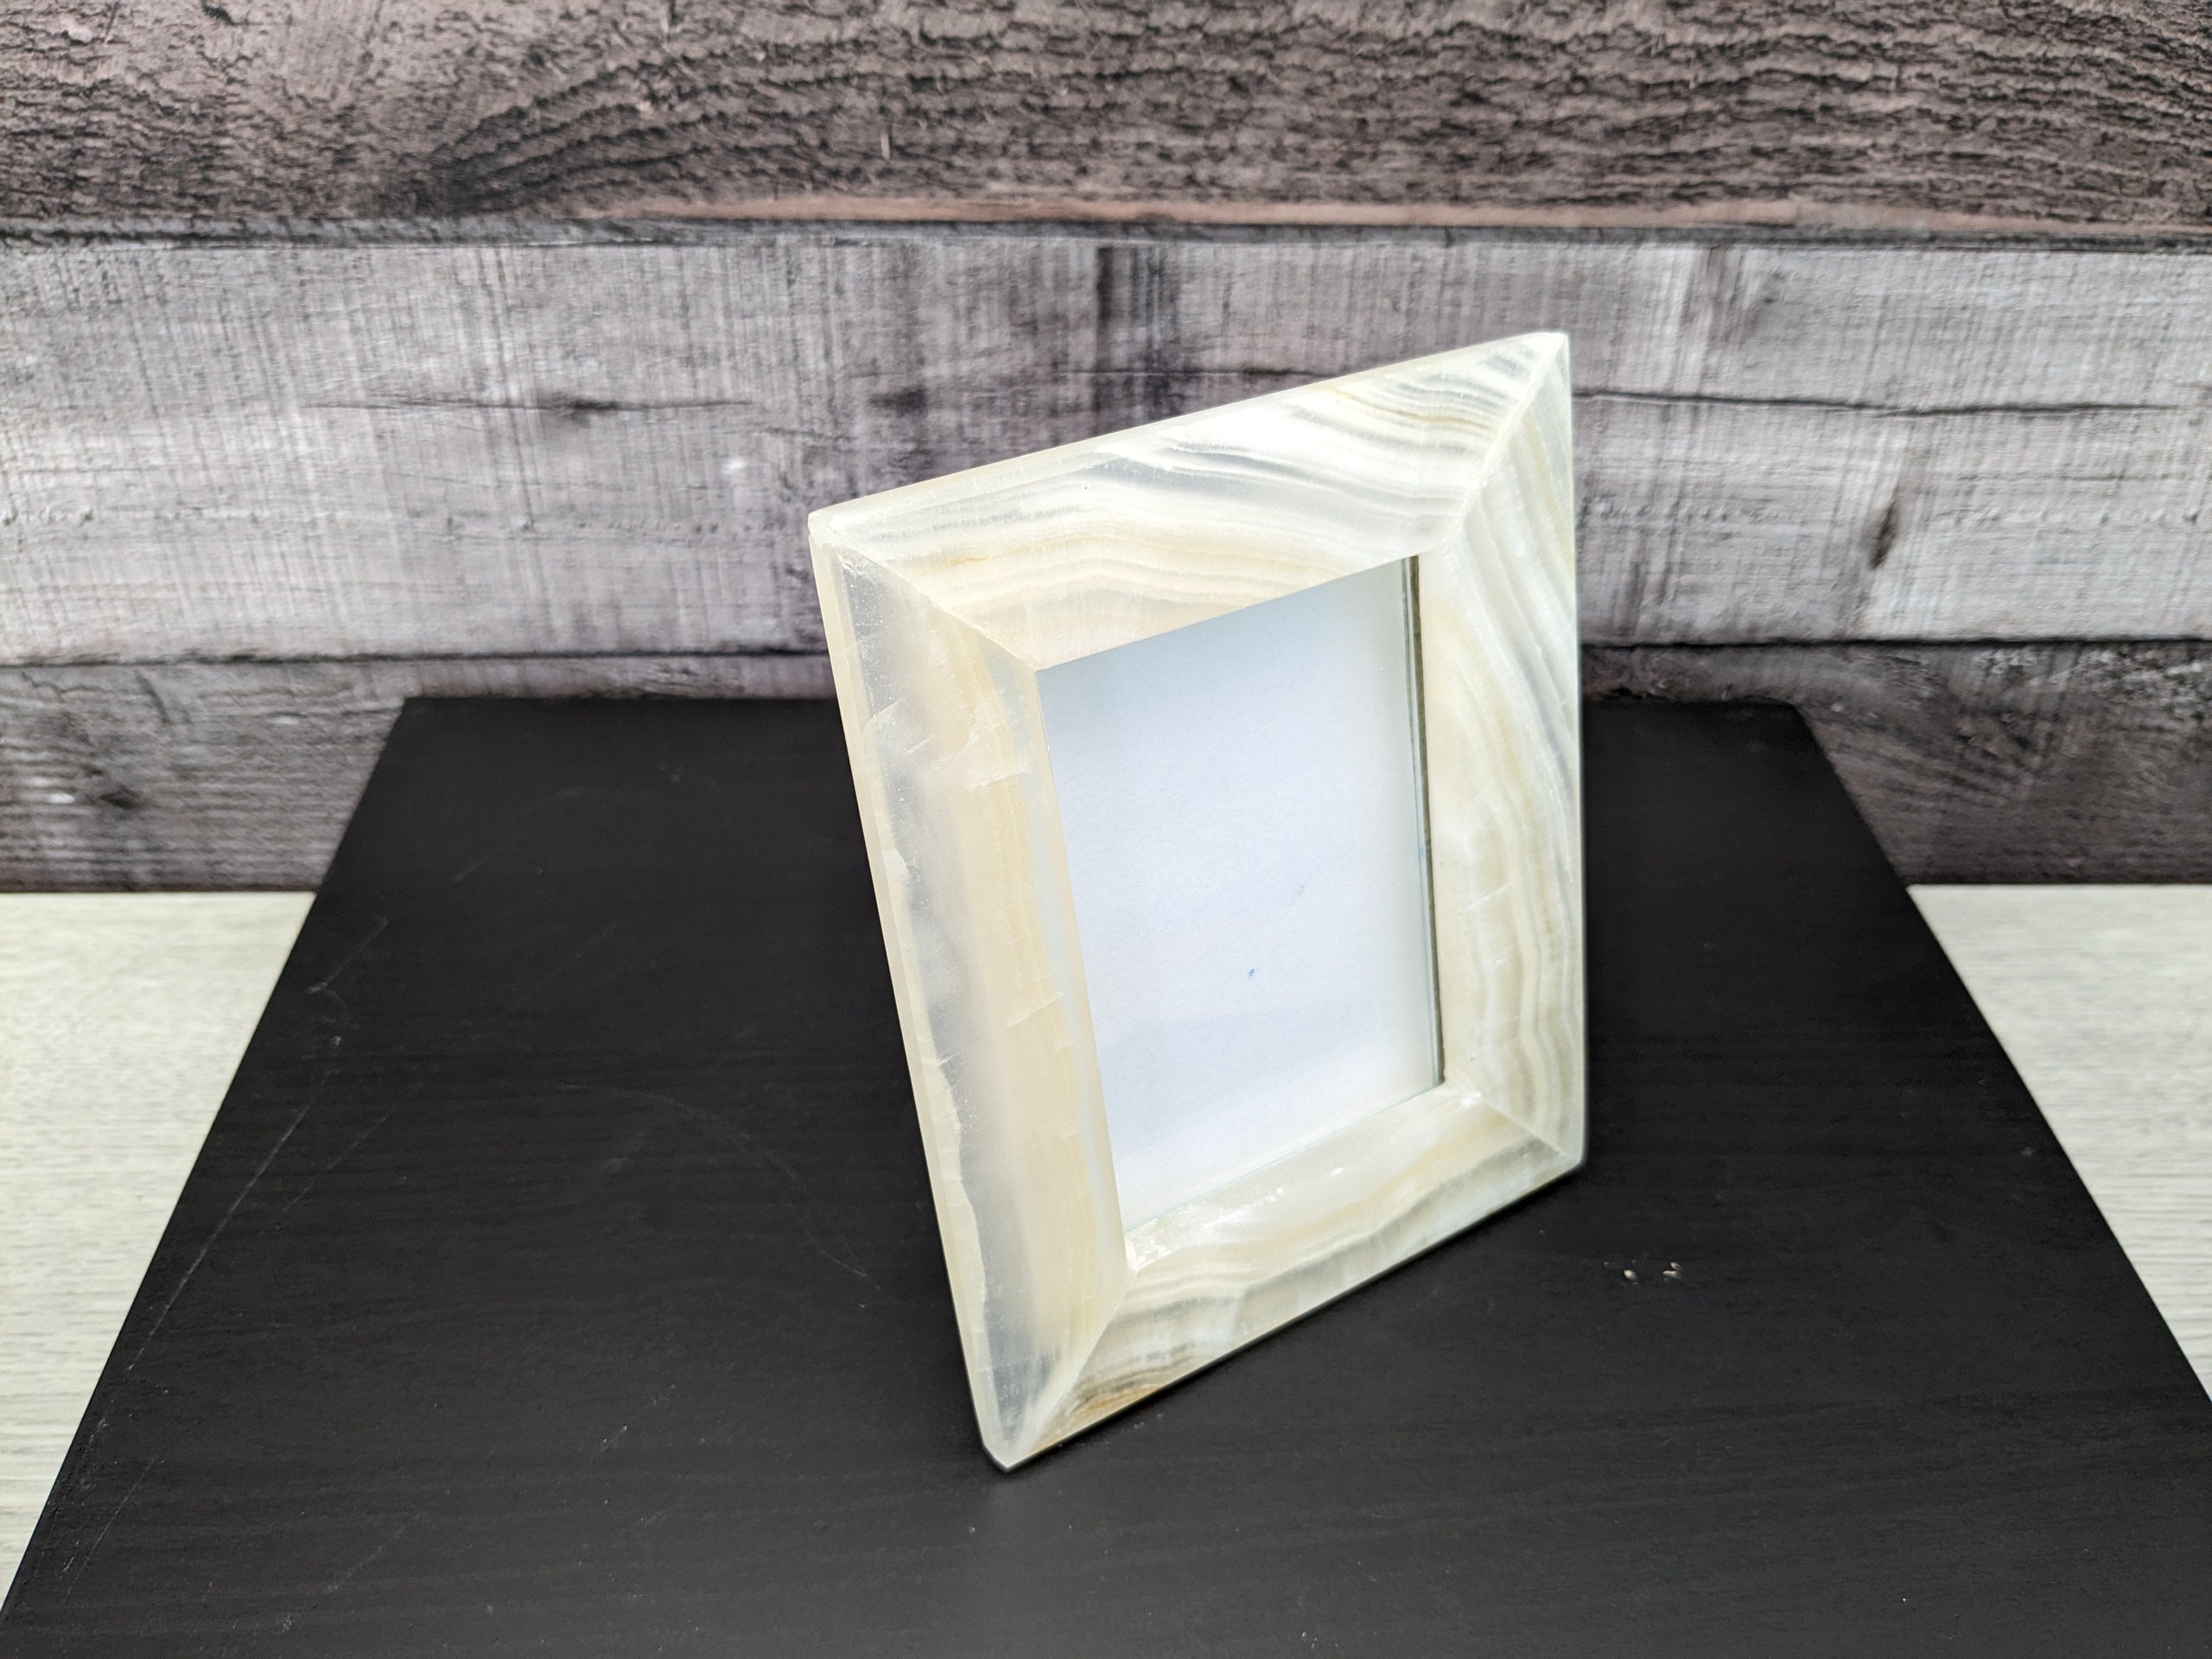 White Onyx Frame with Glass Covering and  Travertine Stone Stand. Handmade in Mexico. We package and ship from the USA. Buy now at www.felipeandgrace.com.